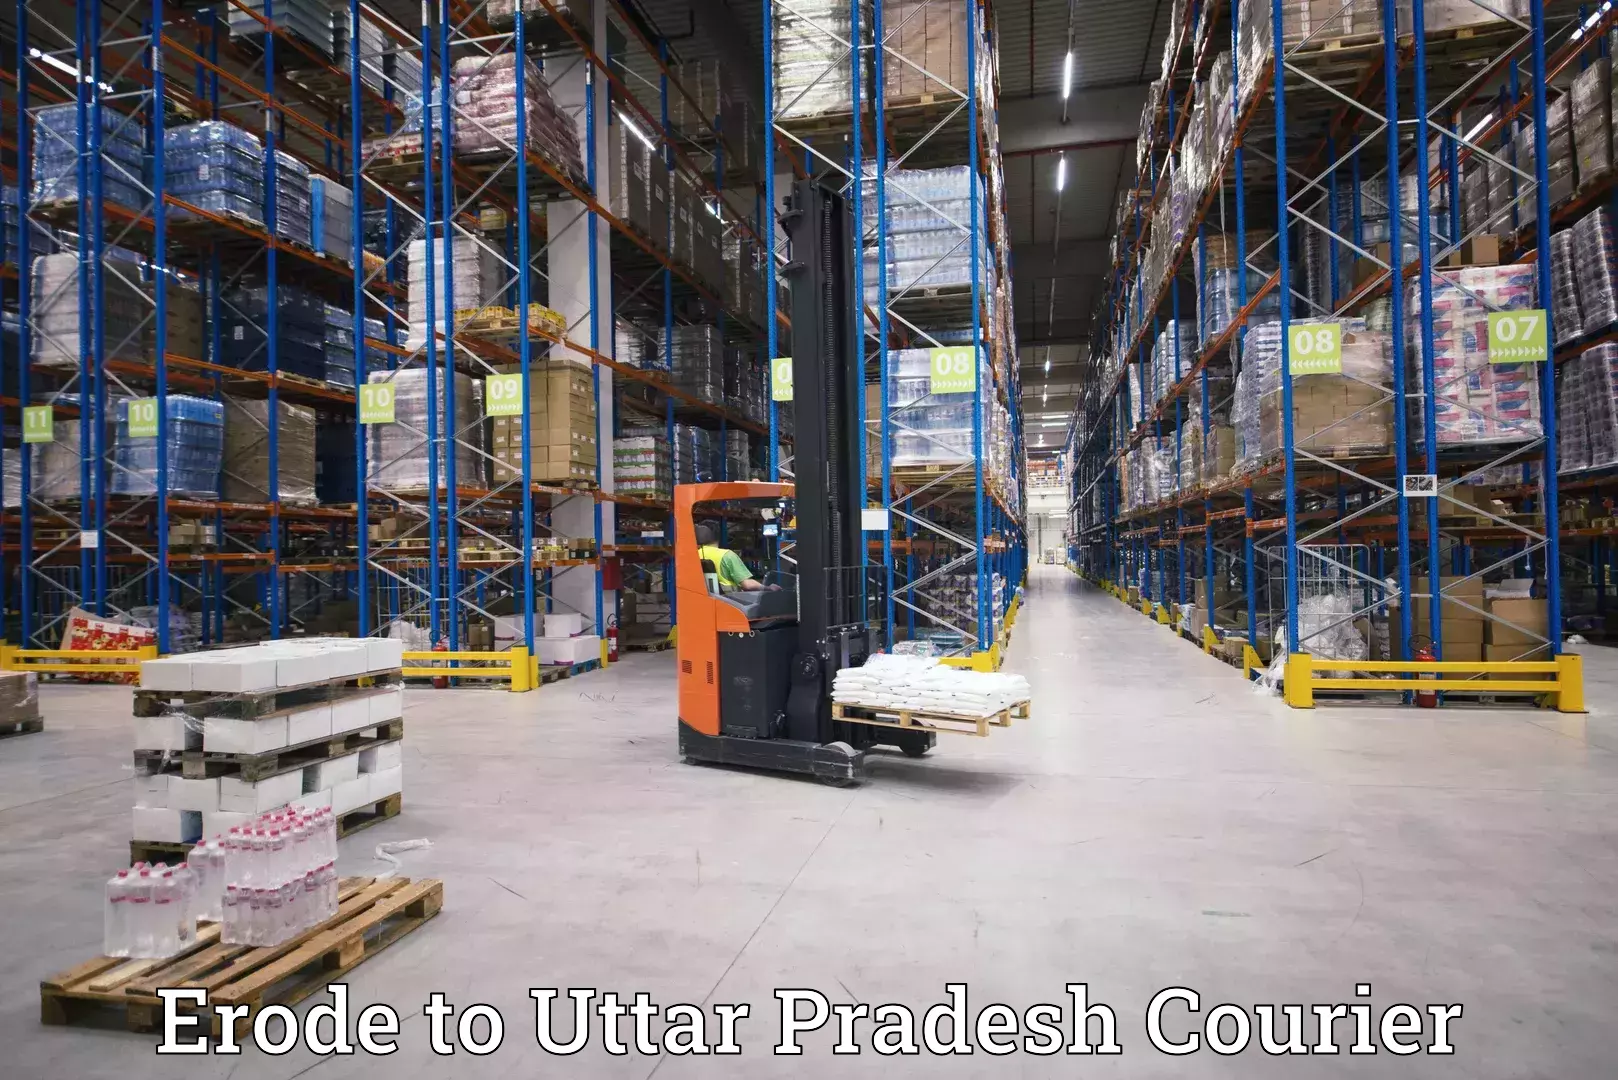 Multi-national courier services Erode to Utraula